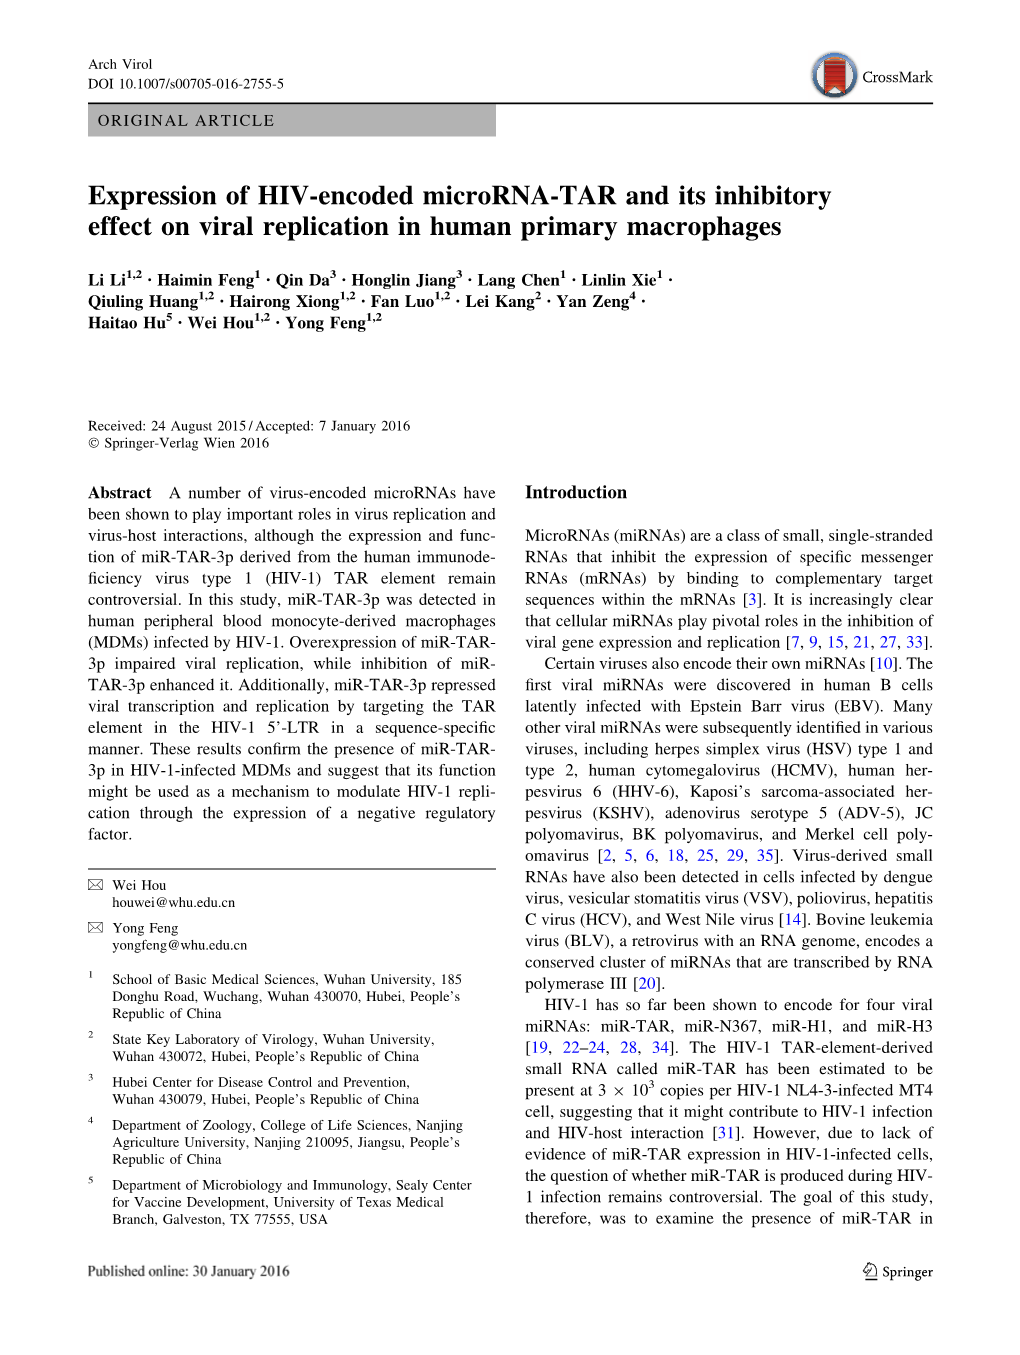 Expression of HIV-Encoded Microrna-TAR and Its Inhibitory Effect on Viral Replication in Human Primary Macrophages